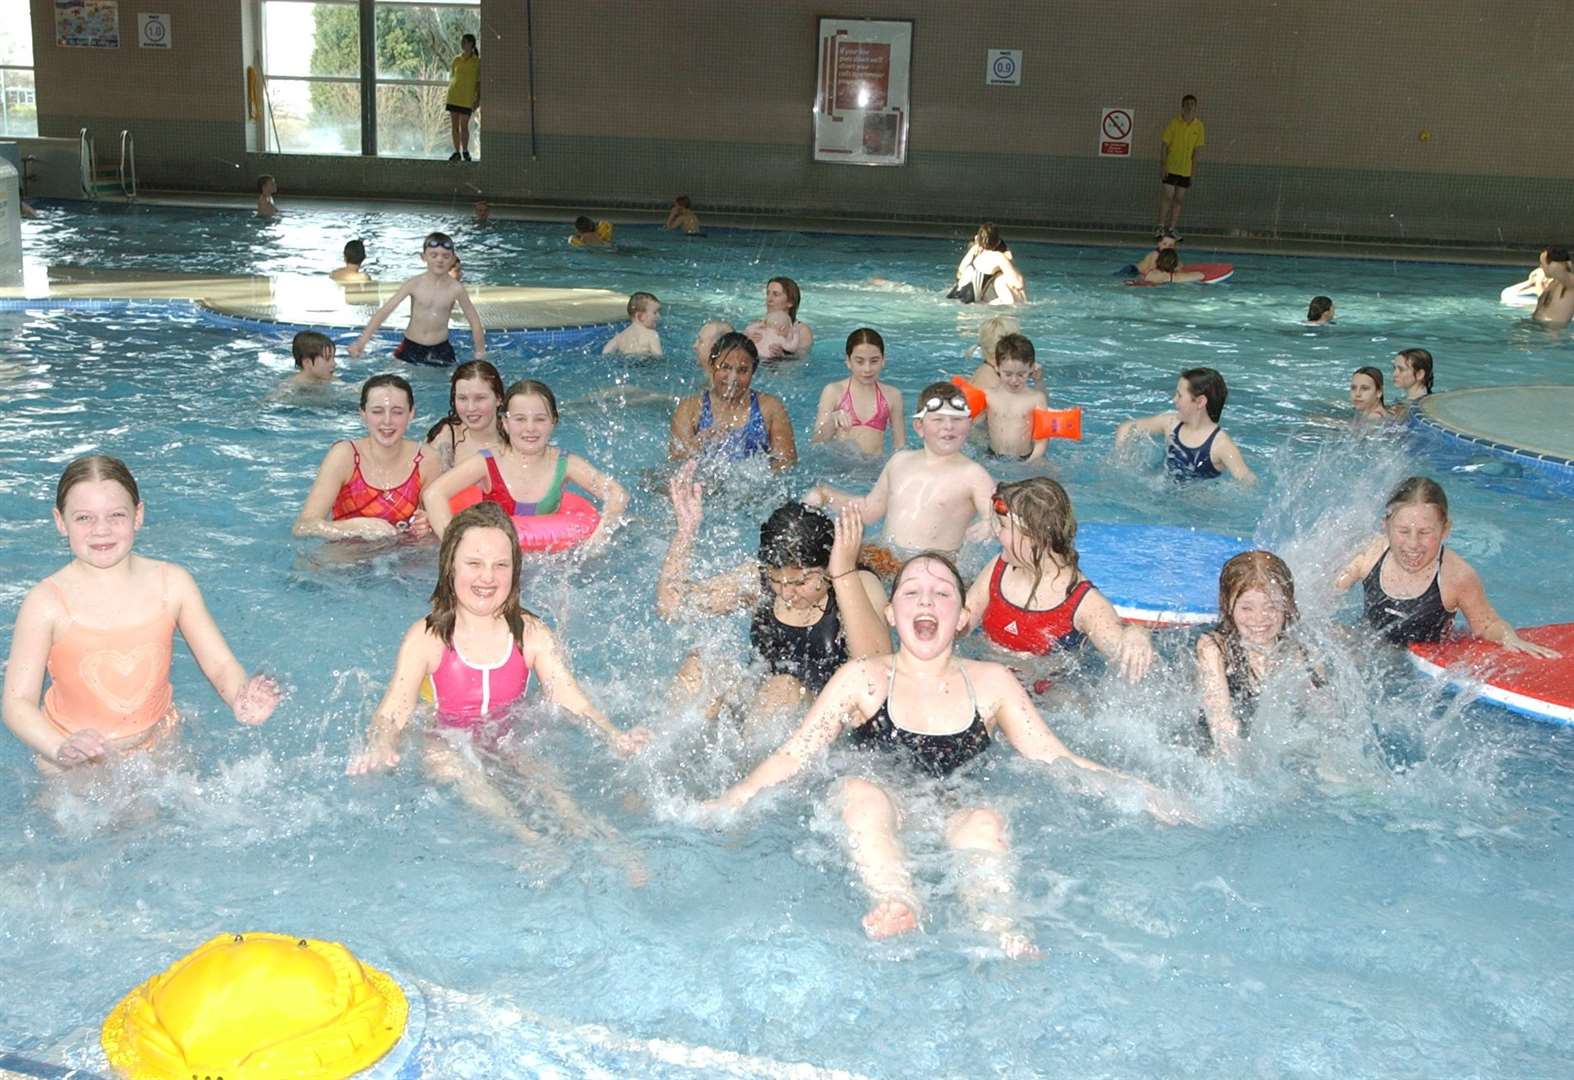 In pictures: 30 years at lost leisure centre